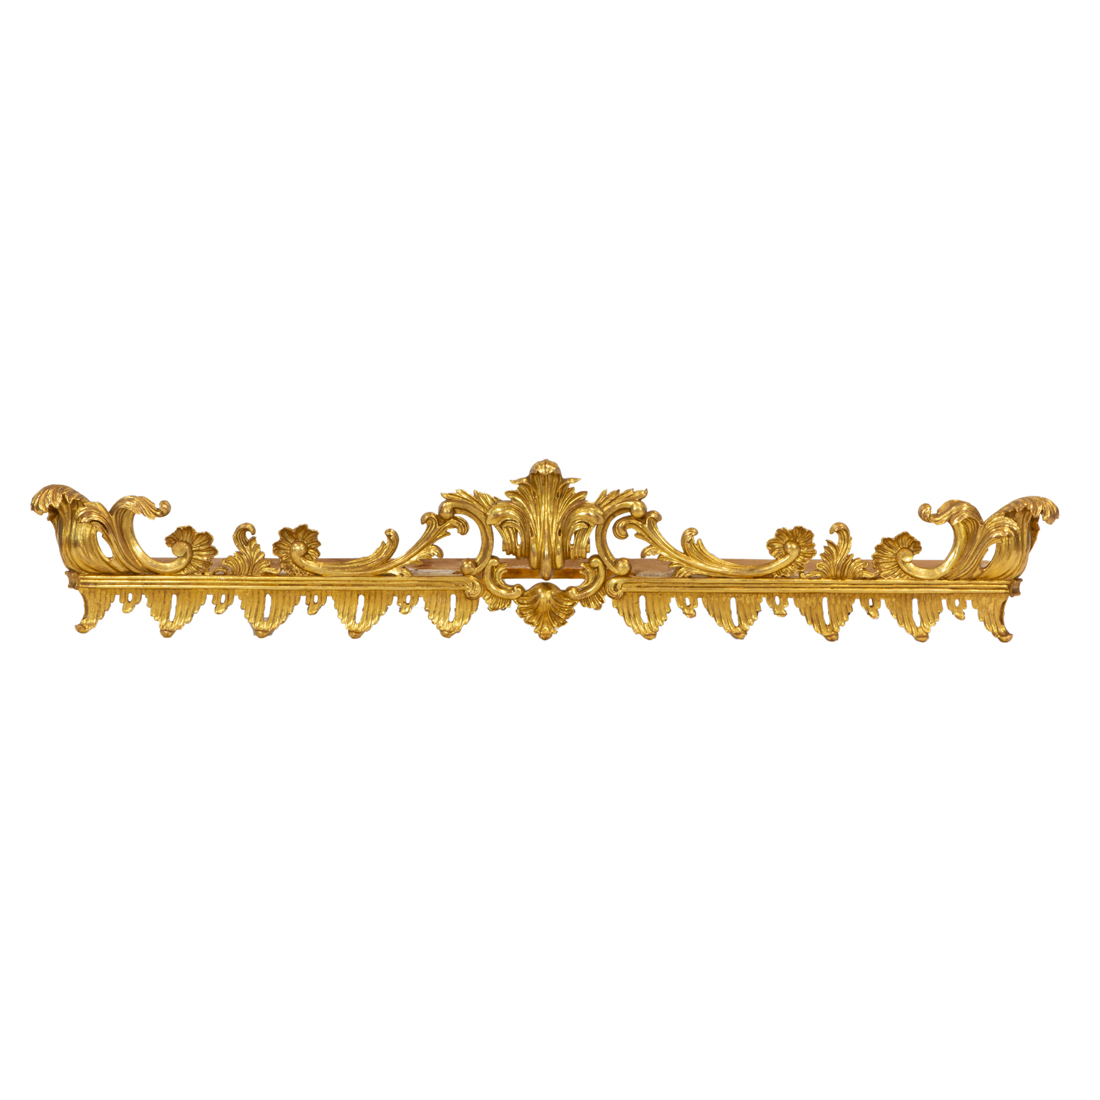 A ROCOCO STYLE CARVED GILTWOOD 3cdde1